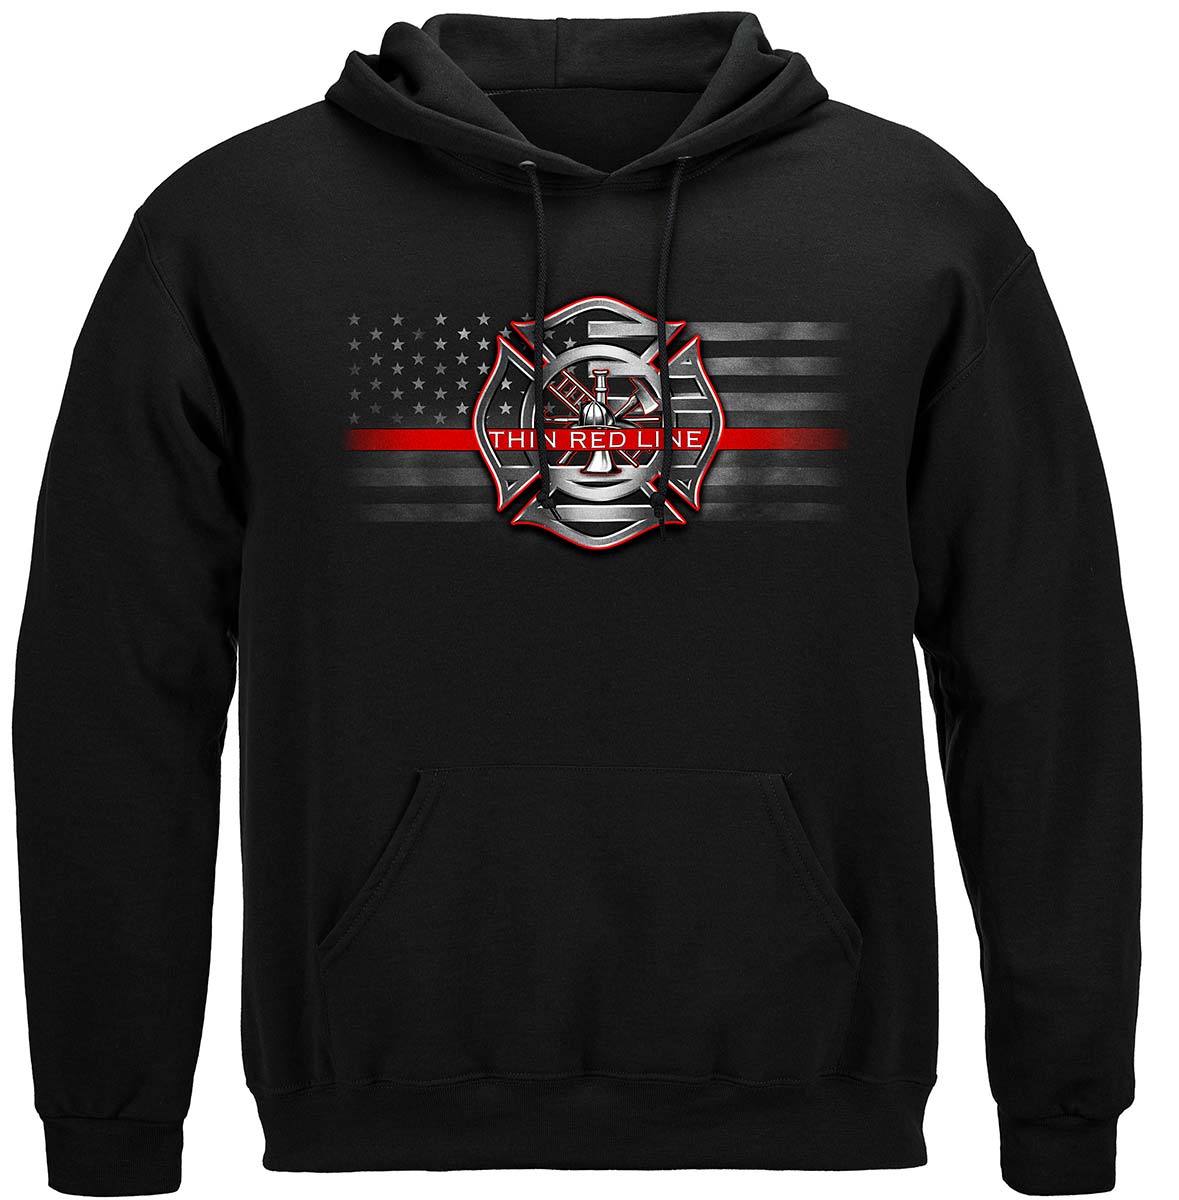 Firefighter I Stand for the Flag kneel for the fallen Premium Hooded Sweat Shirt